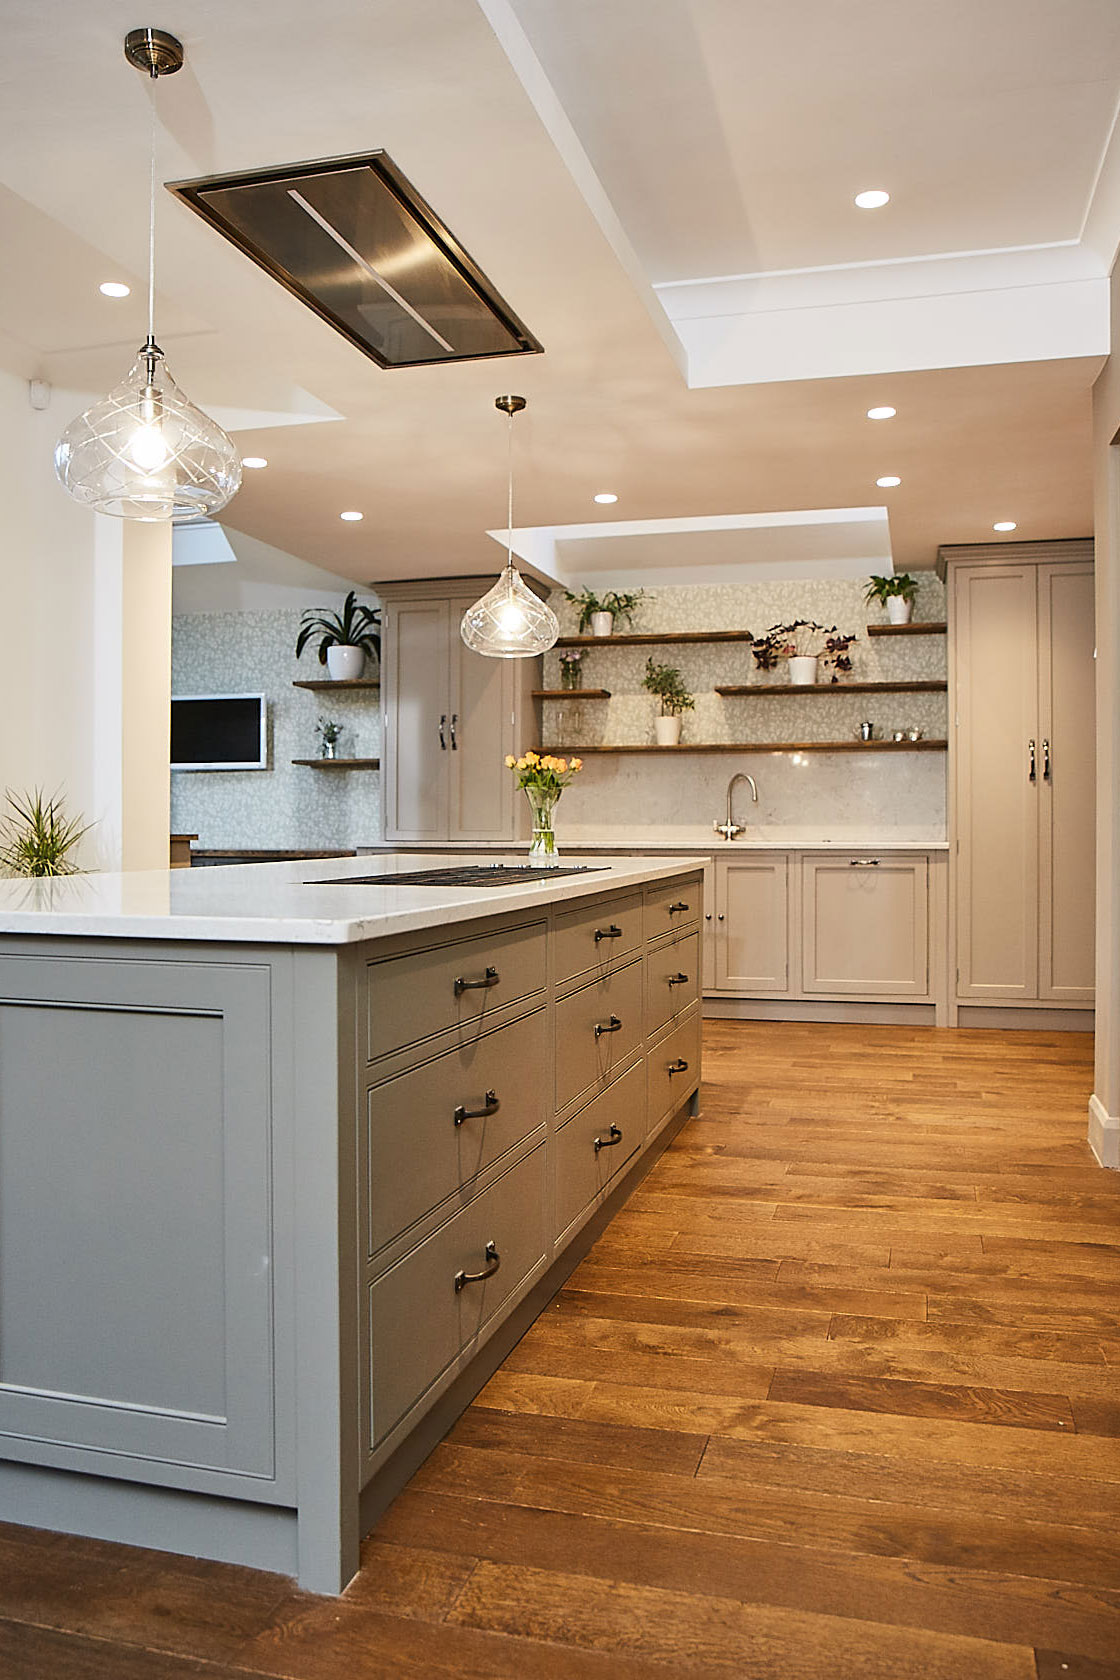 Traditional painted kitchen island with oak floor boards